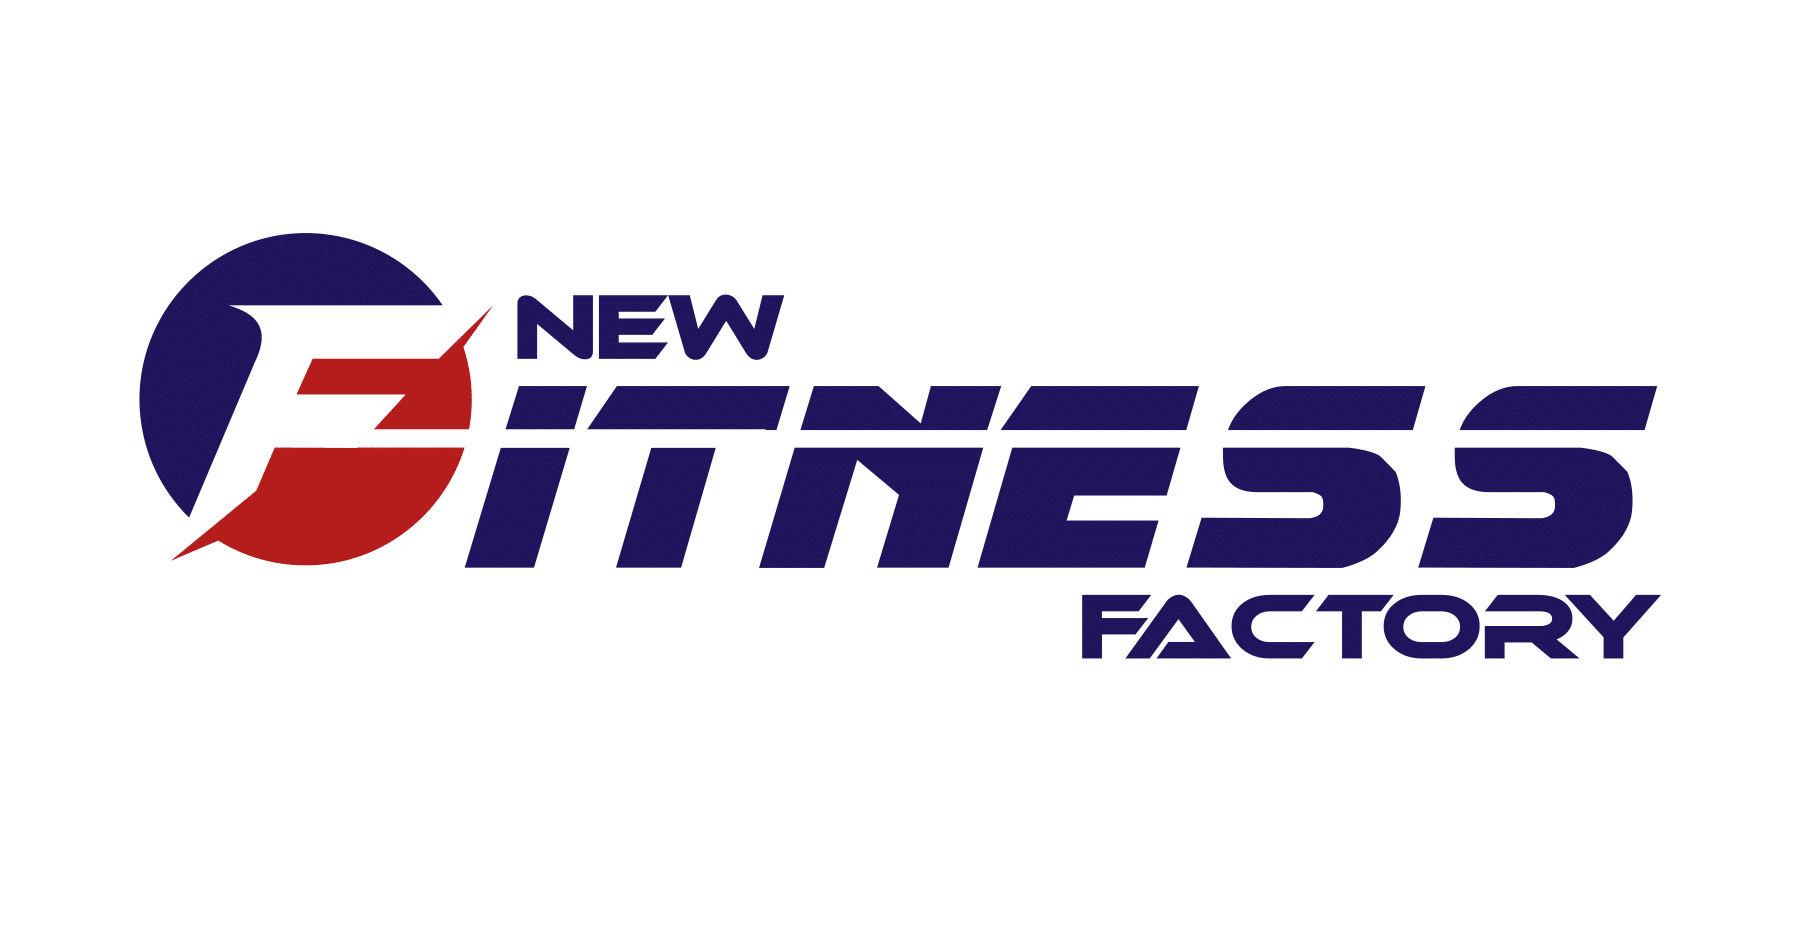 NEW FITNESS FACTORY